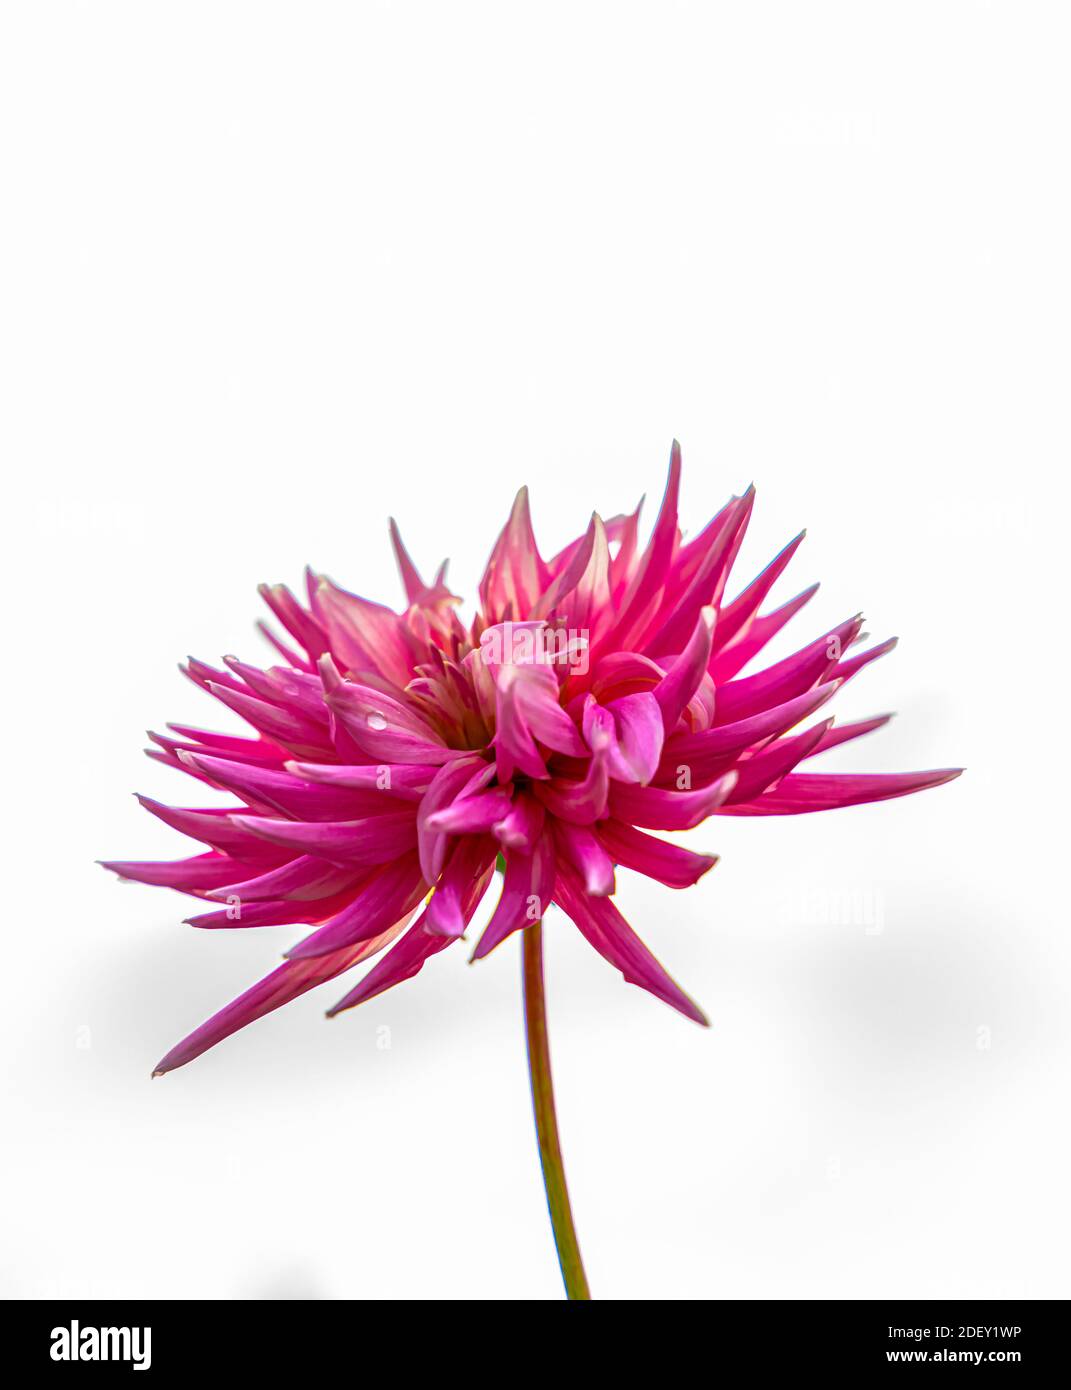 Beautiful pink cactus dahlia flower in full bloom. Isolated on white background. High quality photo Stock Photo